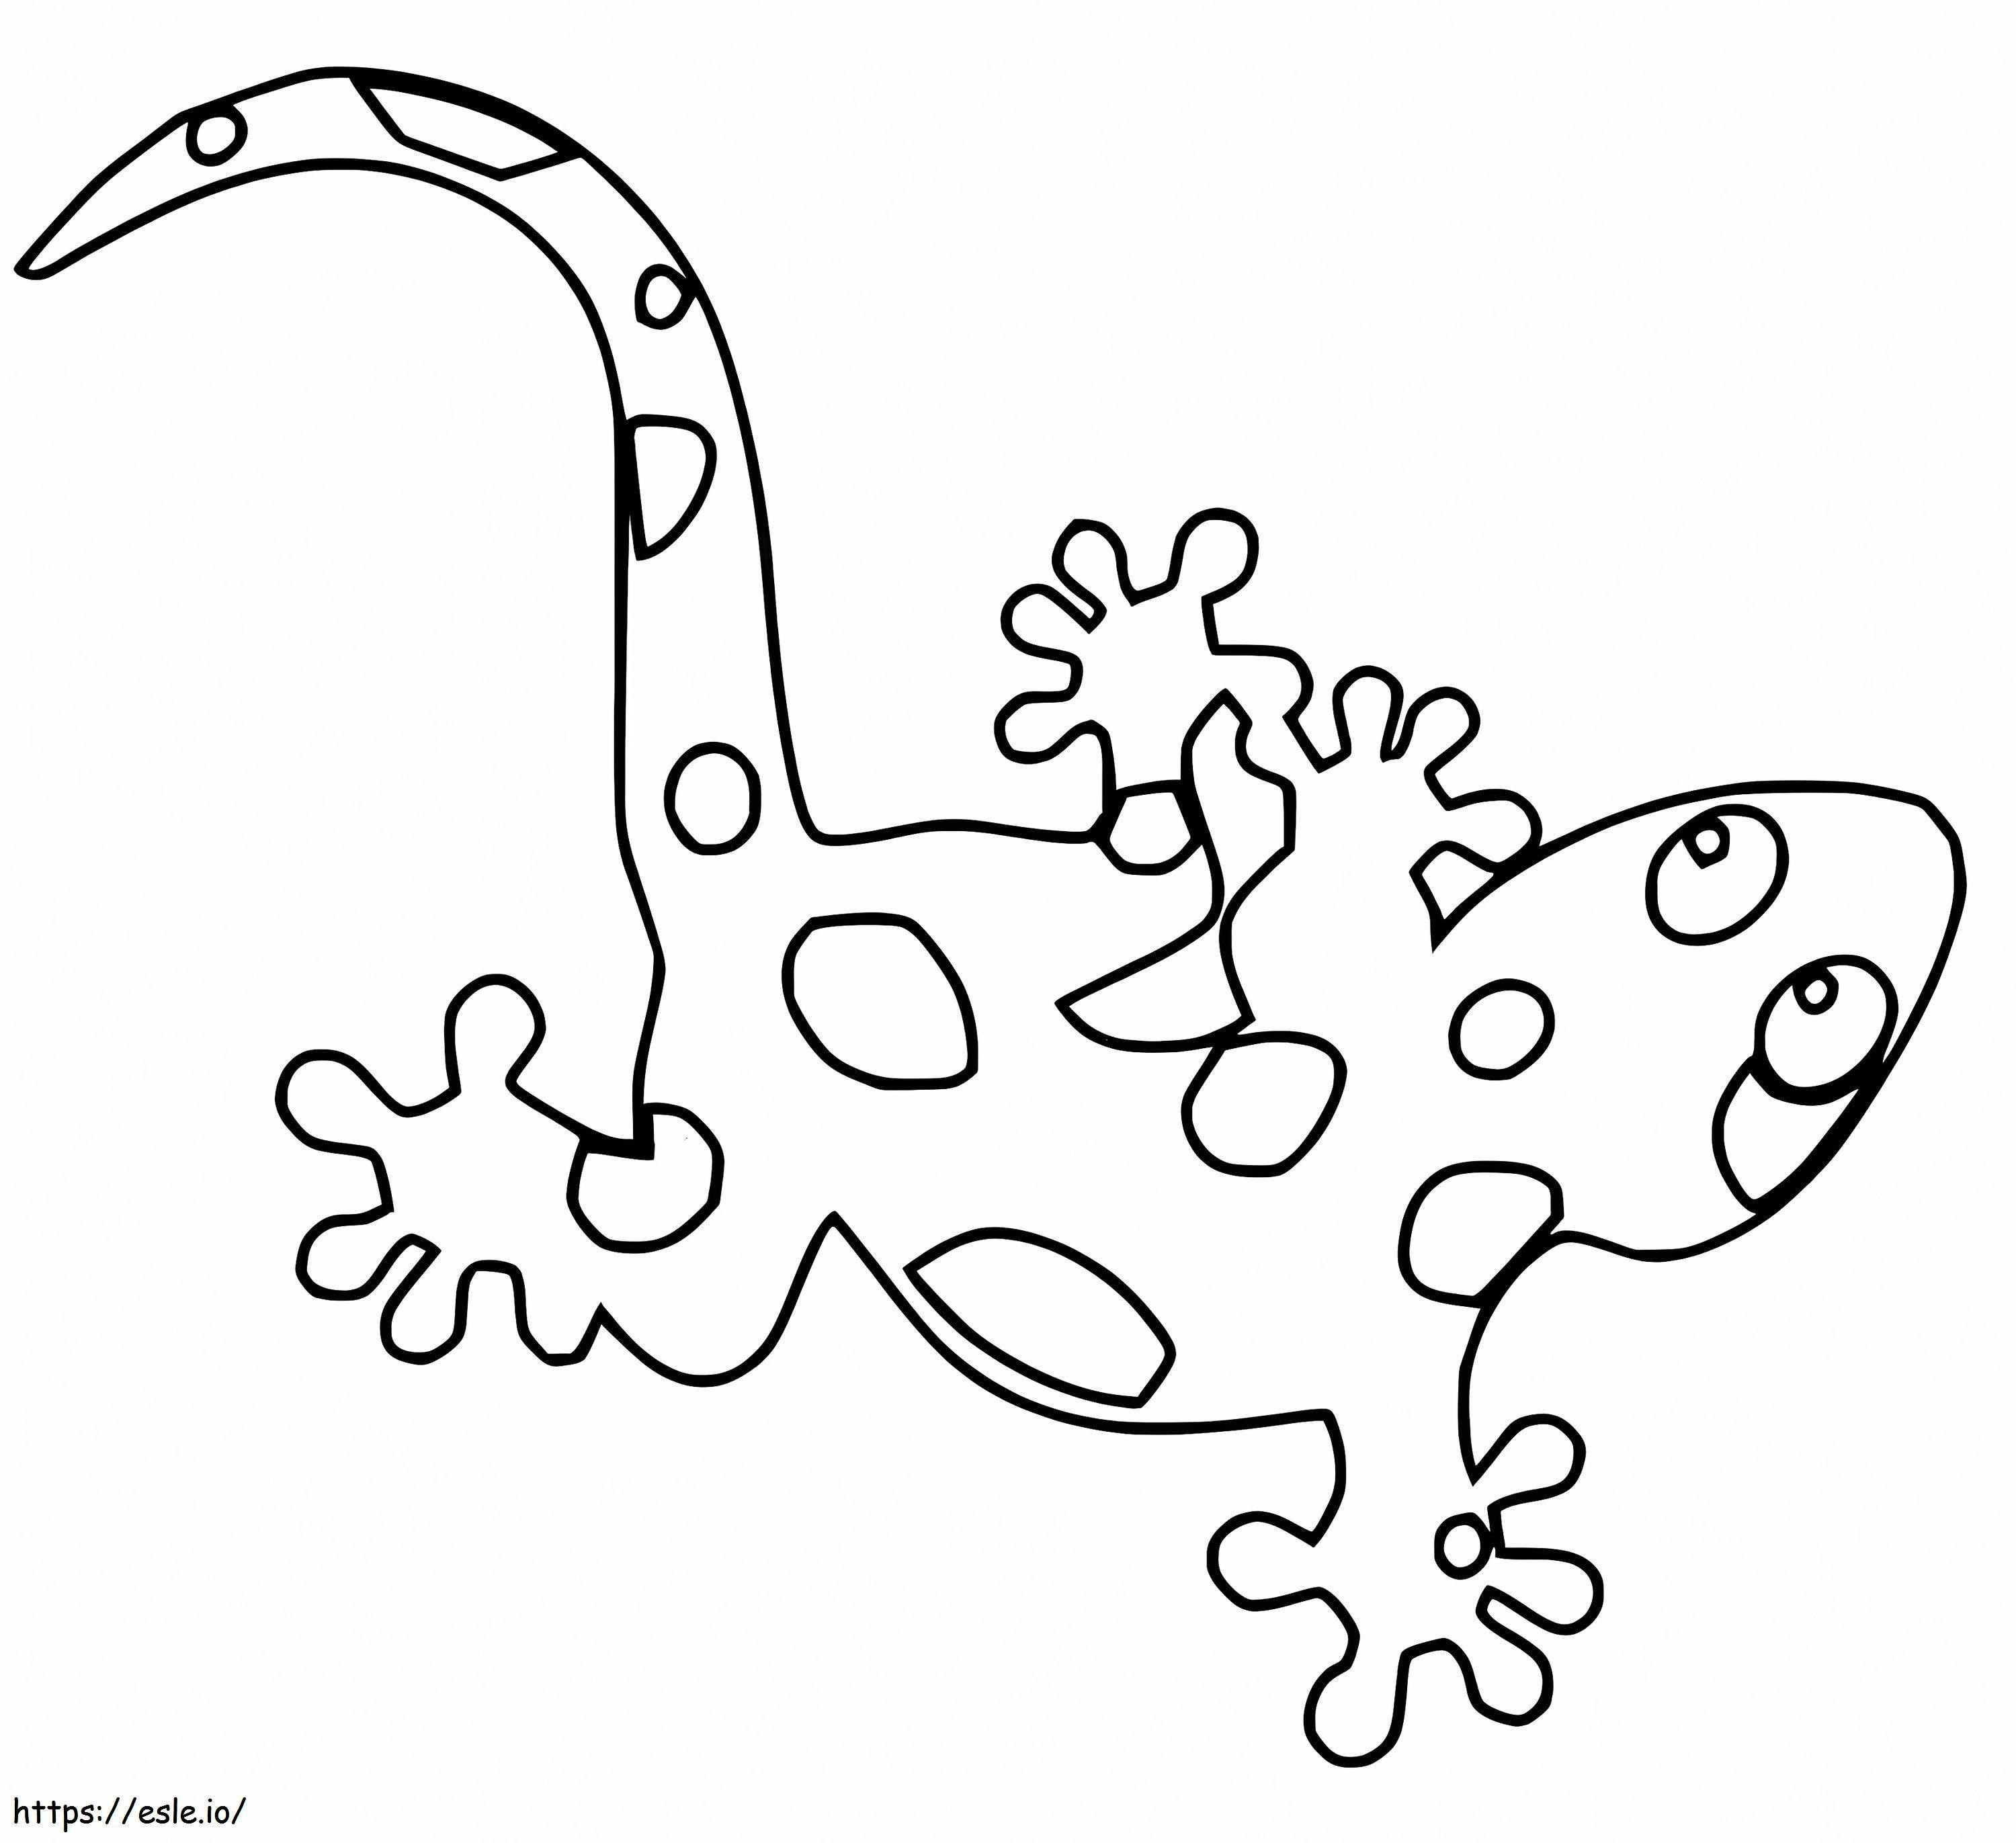 Gecko Tacchet coloring page